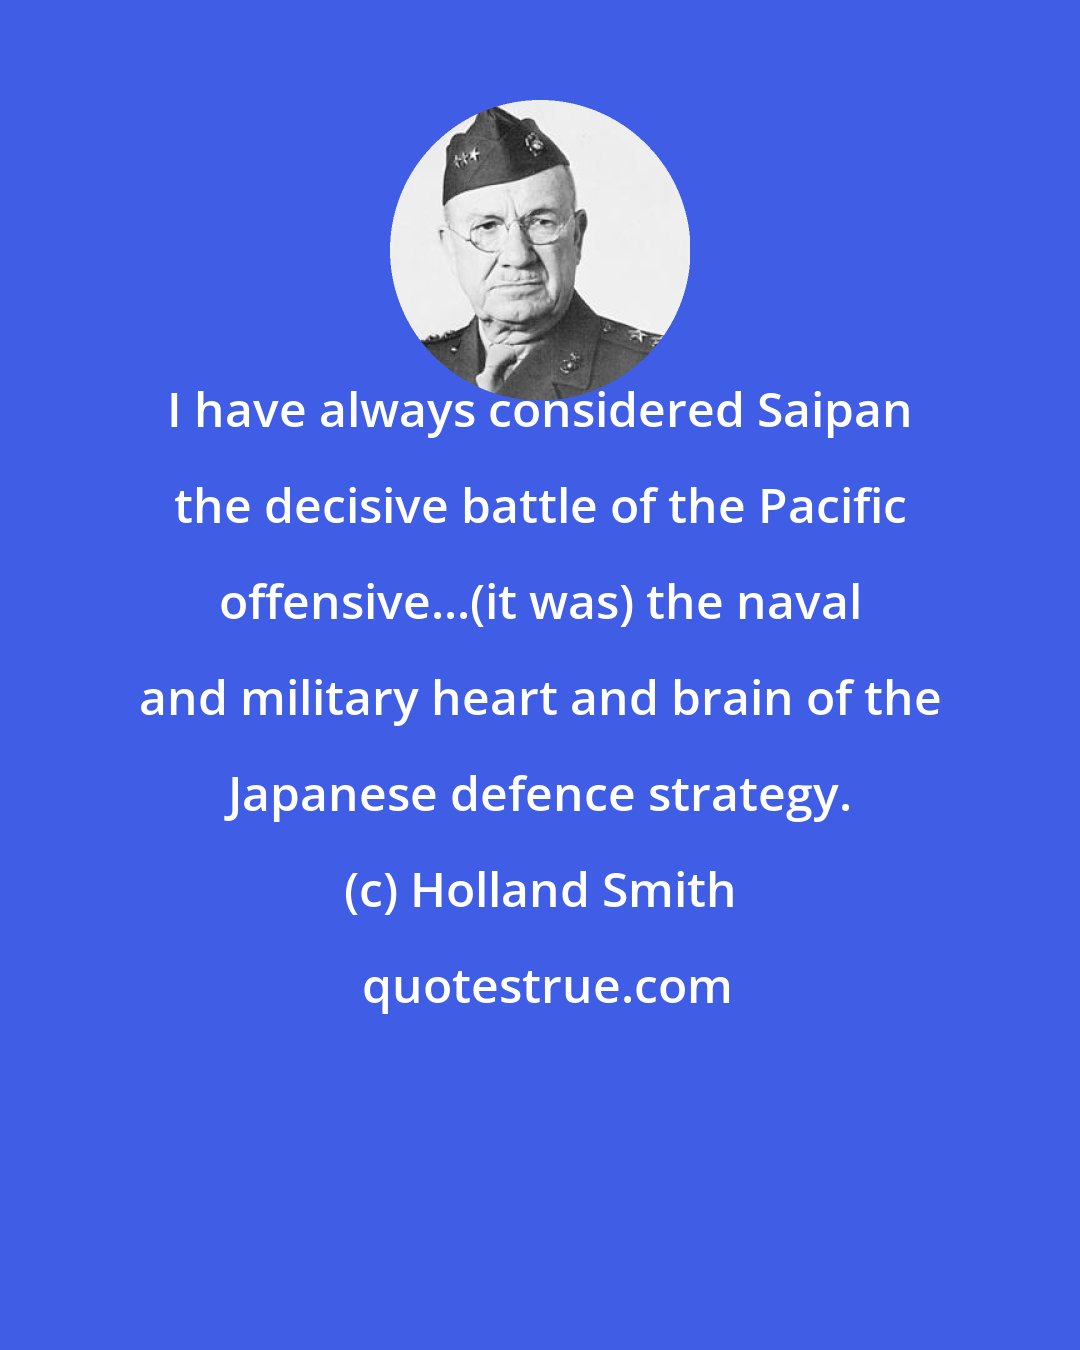 Holland Smith: I have always considered Saipan the decisive battle of the Pacific offensive...(it was) the naval and military heart and brain of the Japanese defence strategy.